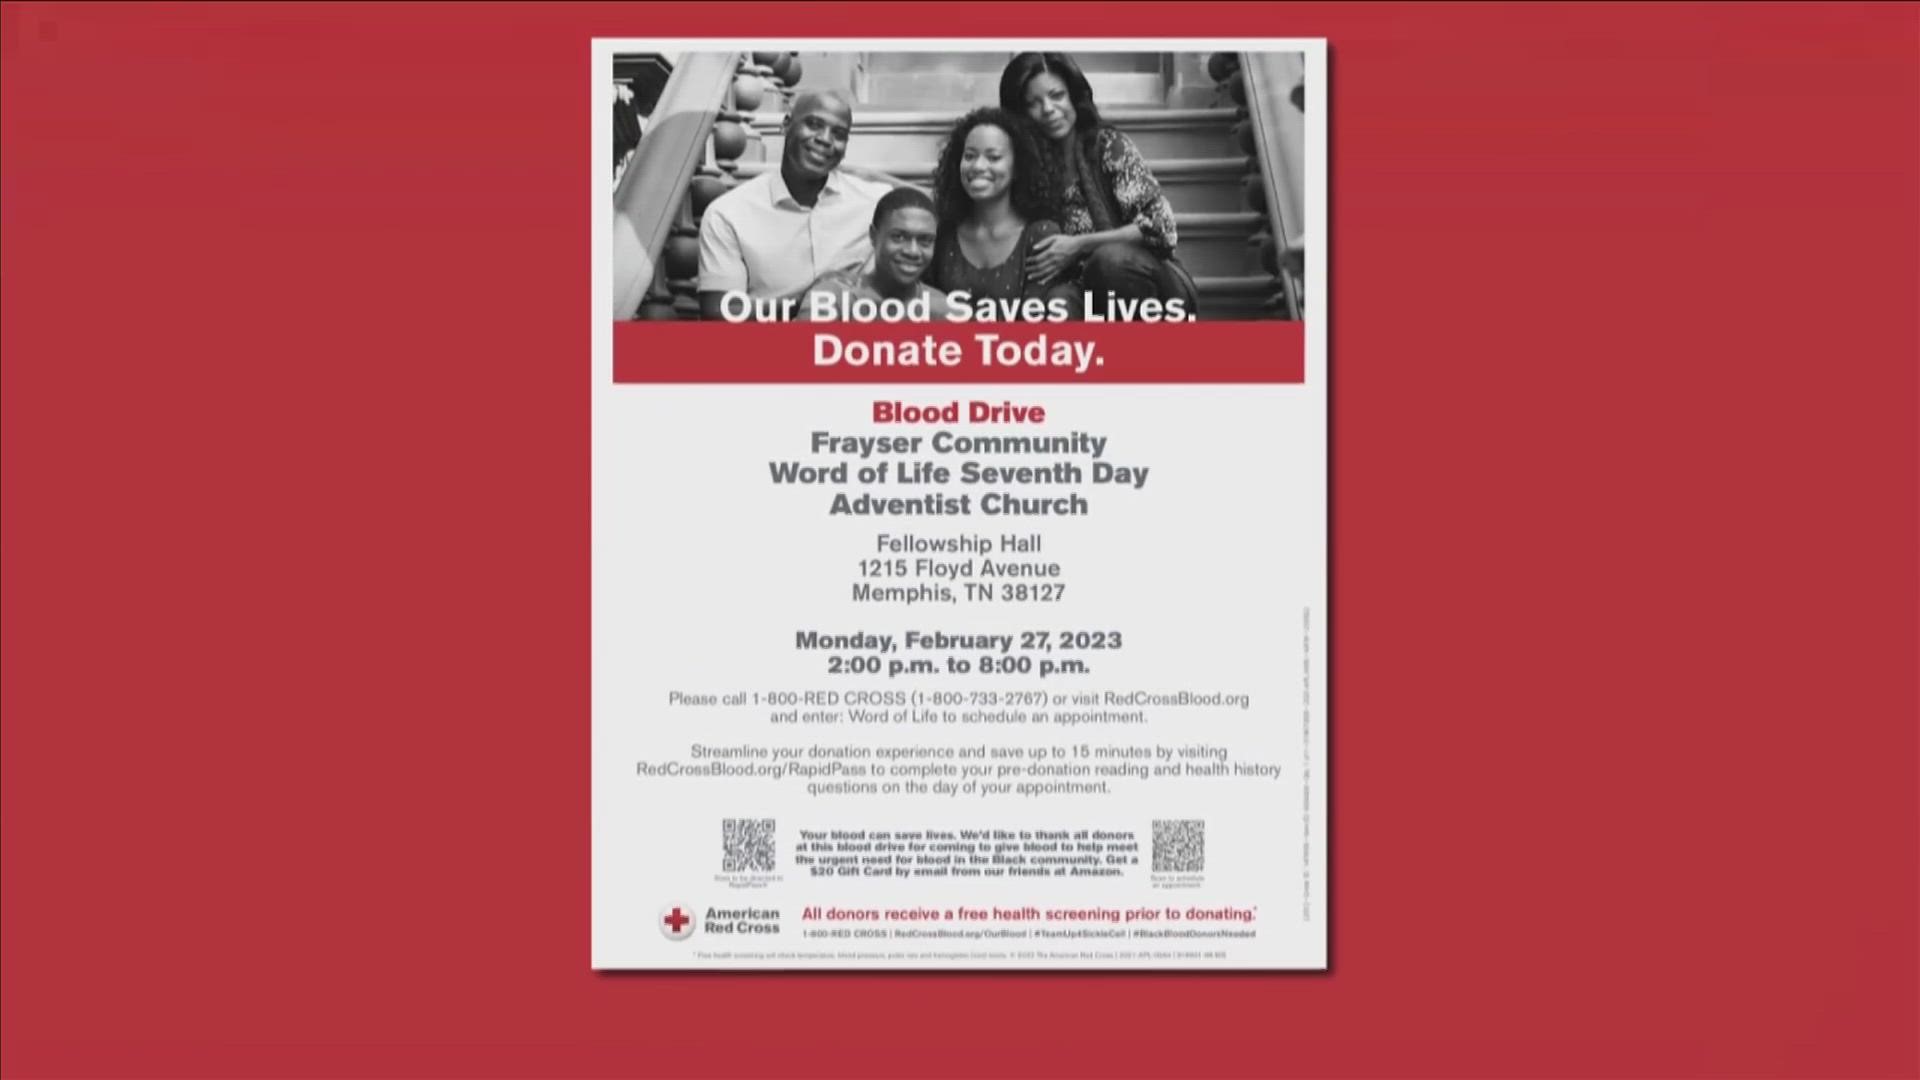 Word of Life Church is set to hold a blood drive at 1215 Floyd Avenue in their fellowship hall from 2 p.m. until 8 p.m. The event is personal for those organizing.